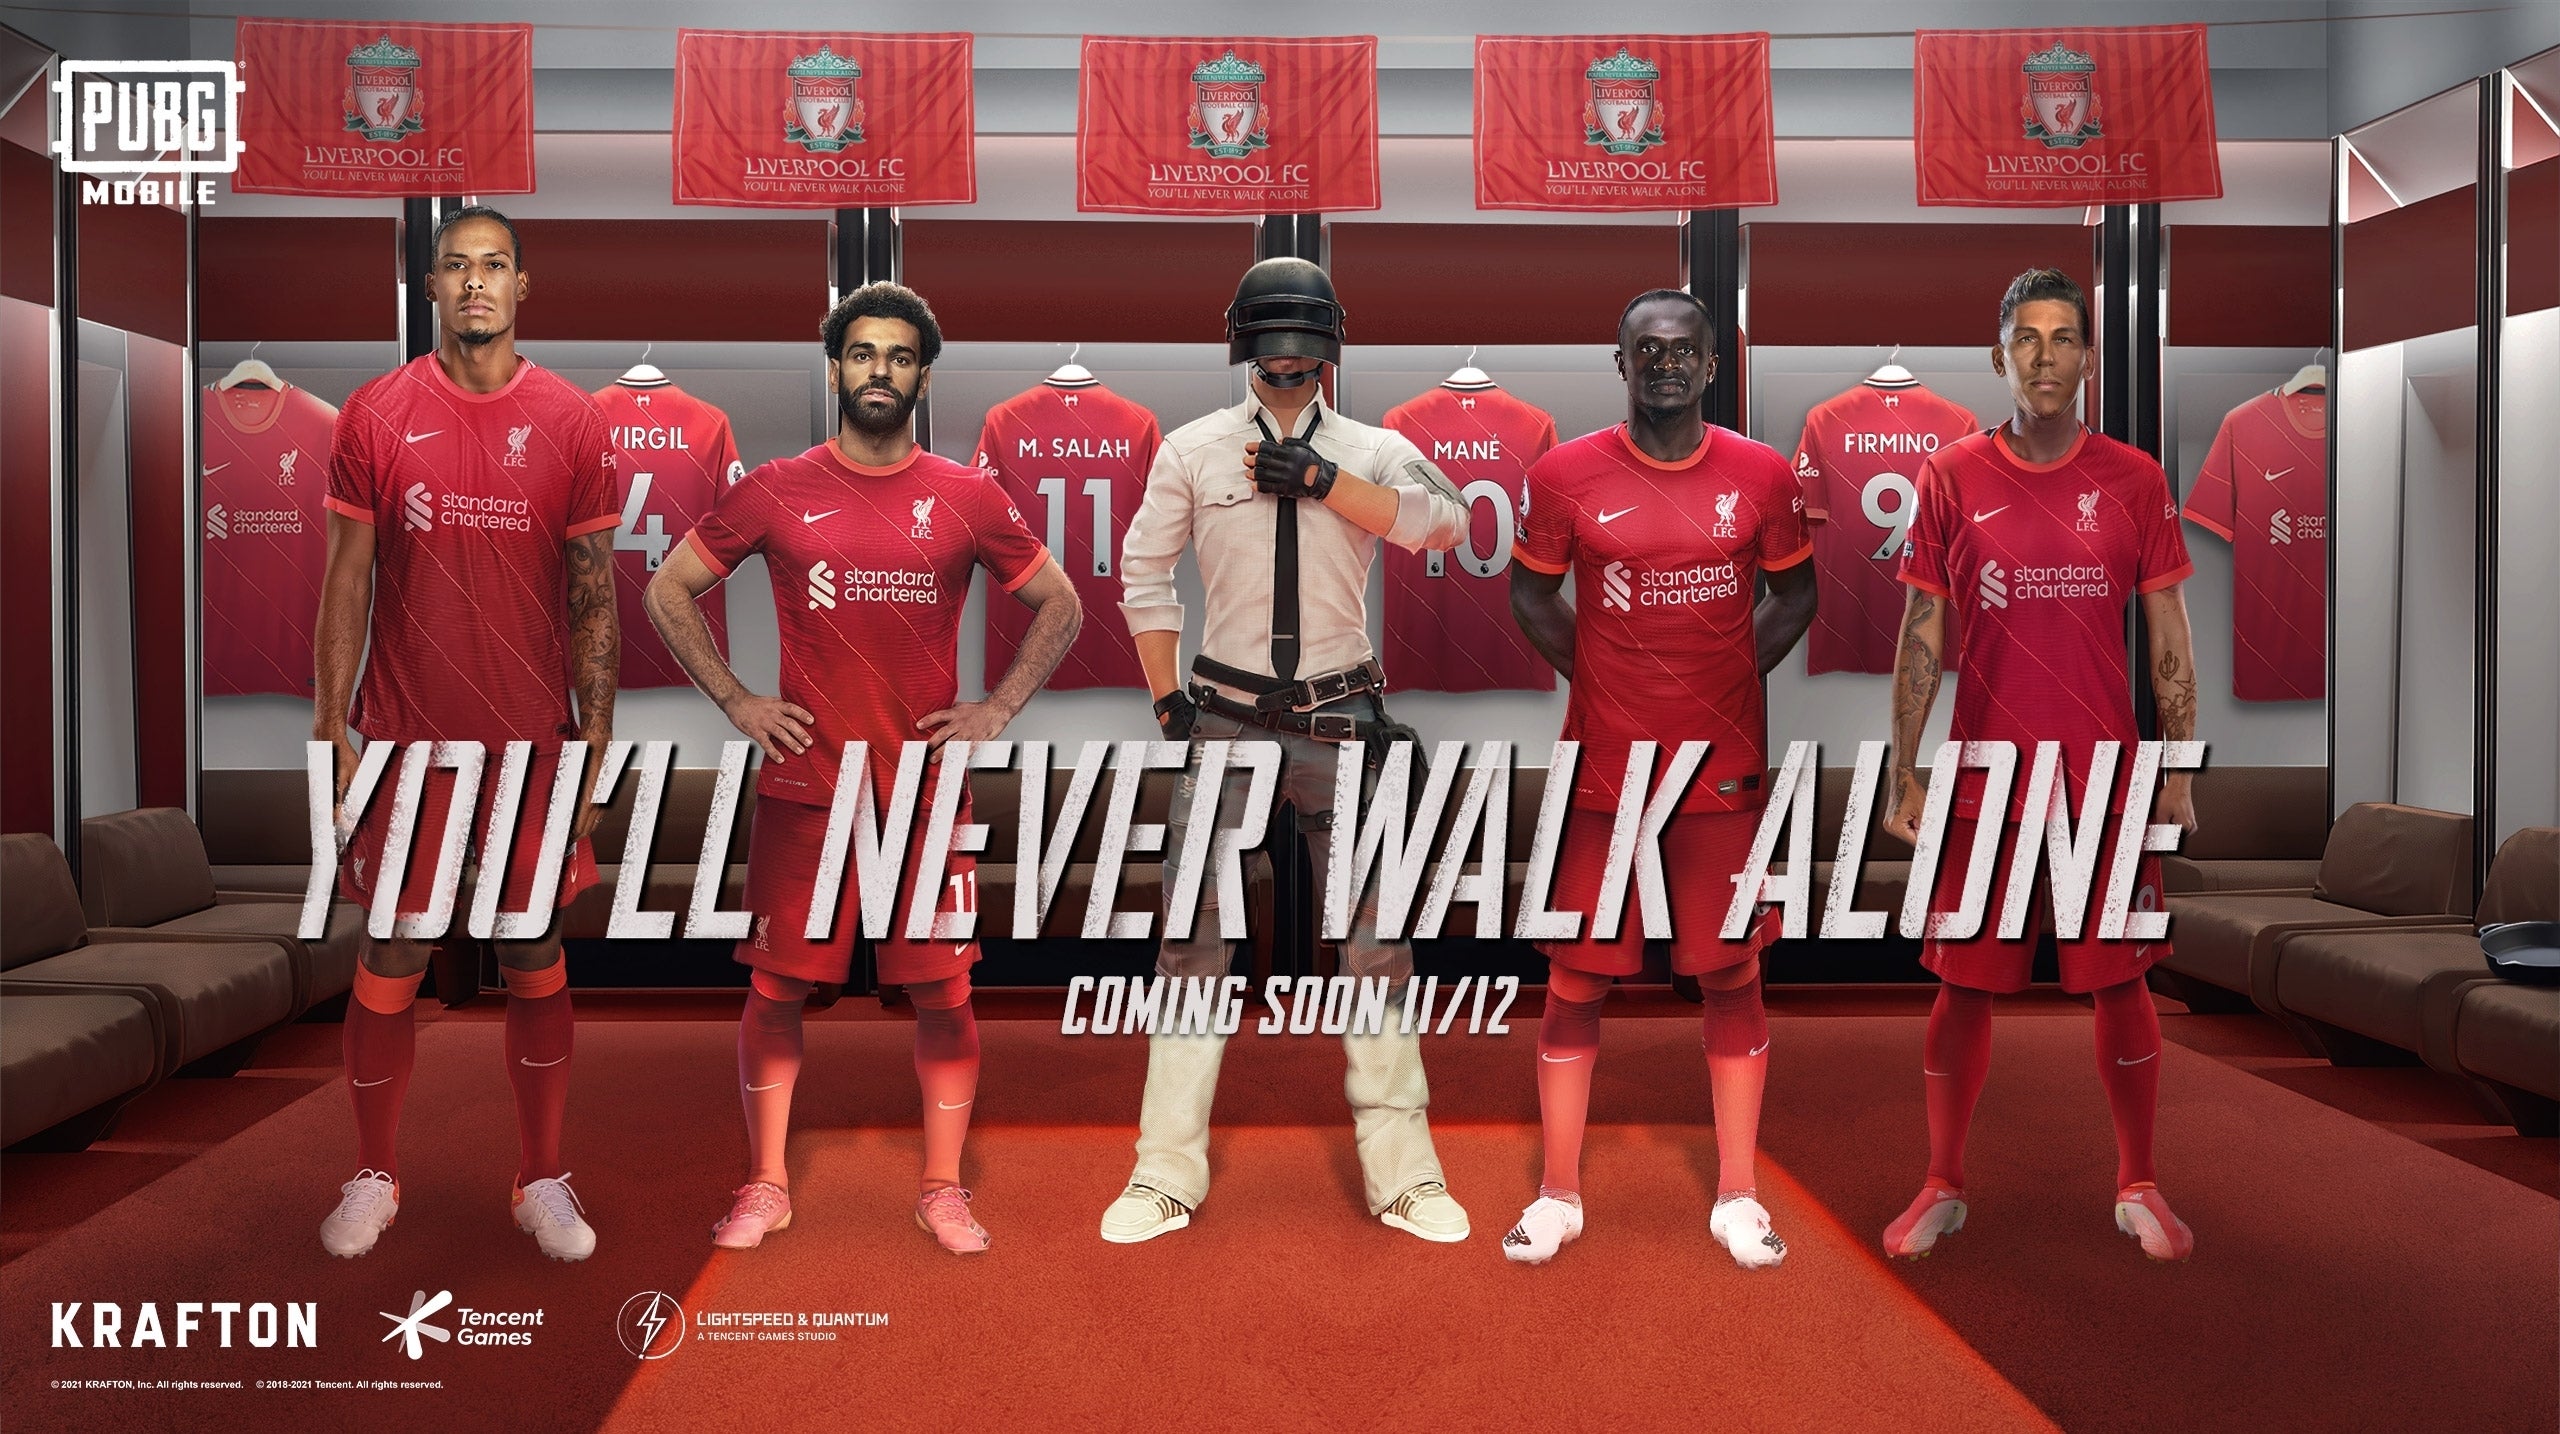 Image for PUBG Mobile is getting Liverpool FC kits